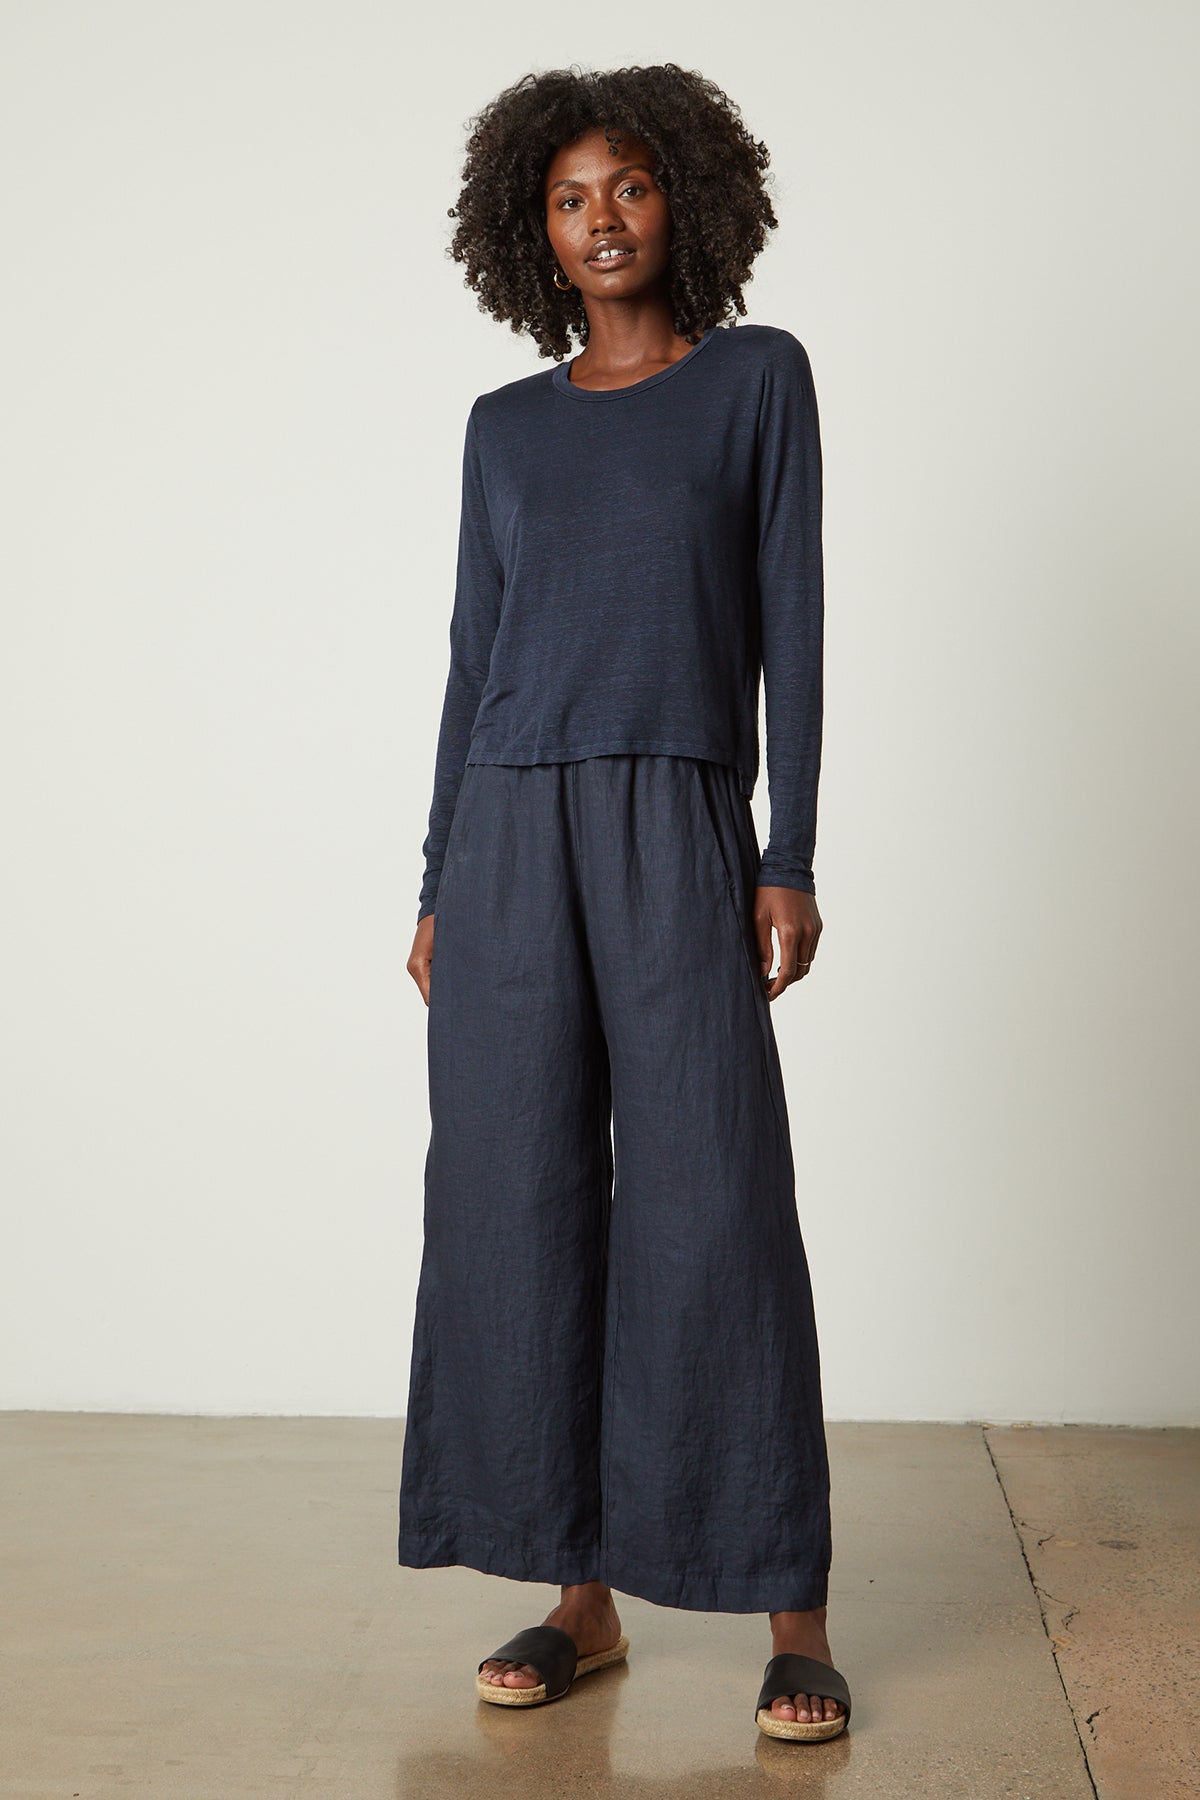   The model is wearing a navy KARA CREW NECK TEE made by Velvet by Graham & Spencer, providing a perfect base layer for the wide leg pants. The ensemble showcases a natural texture. 